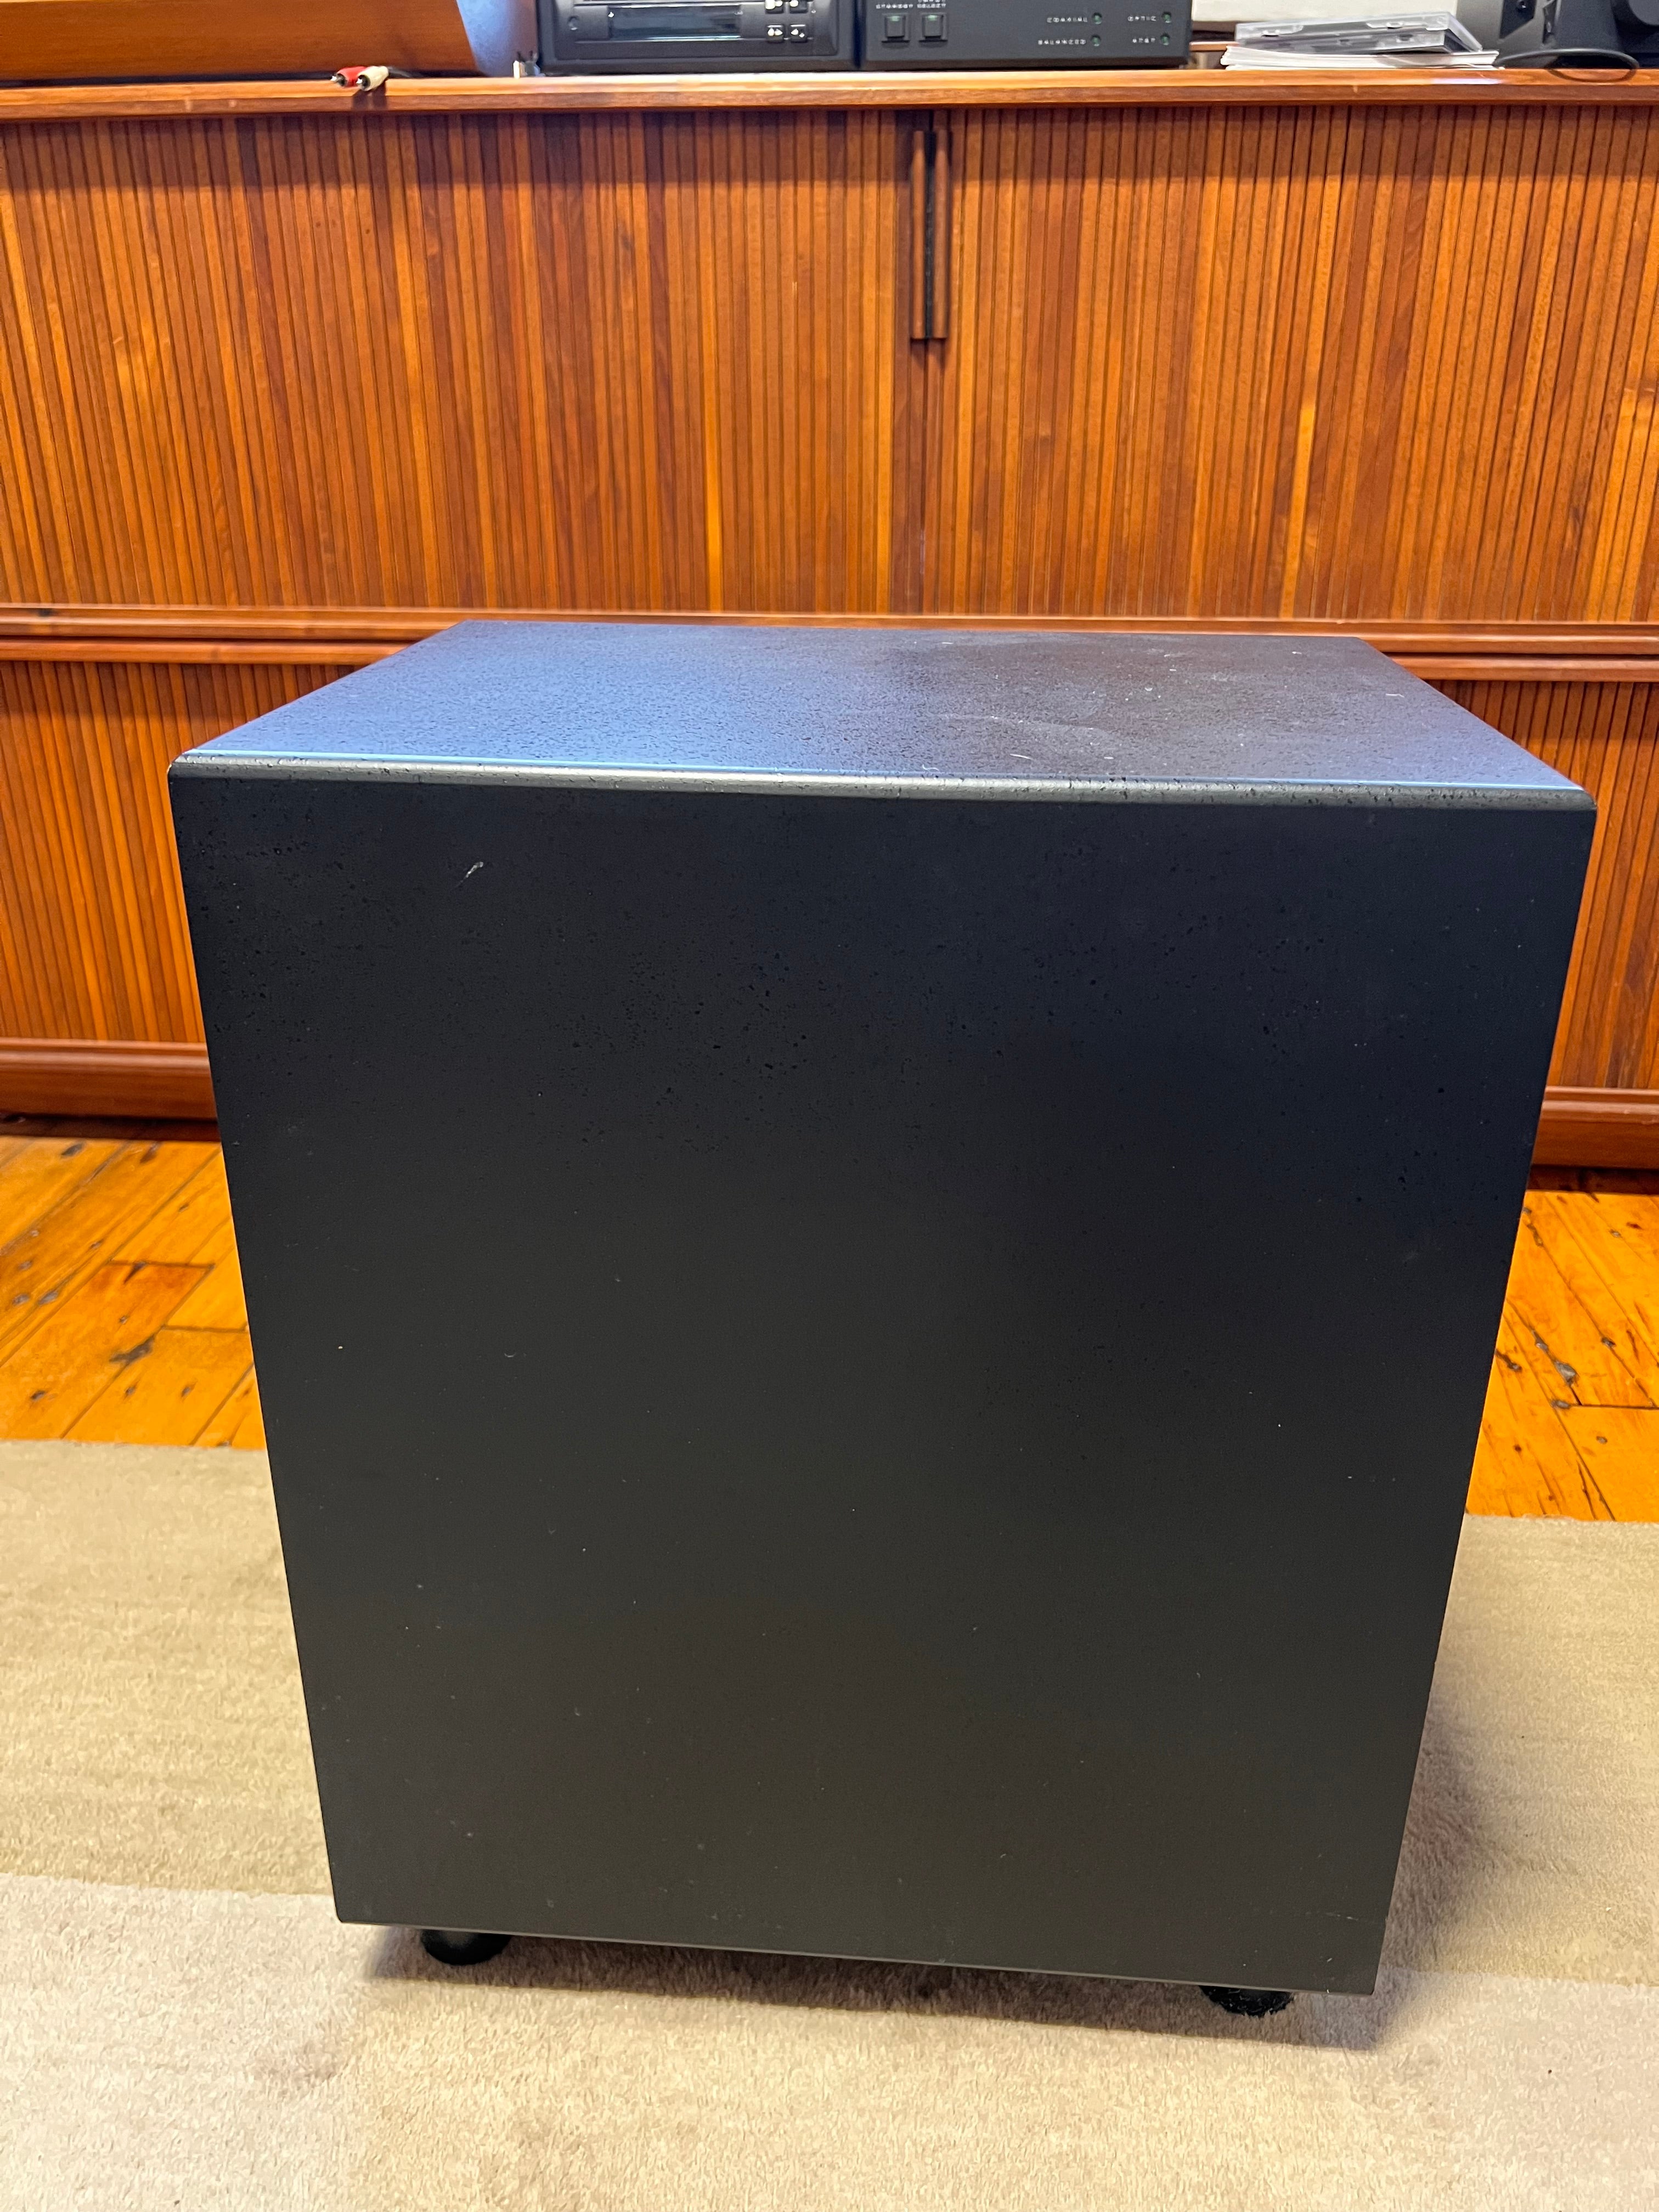 REL Strata III Subwoofer, Smooth and Powerful Low-End